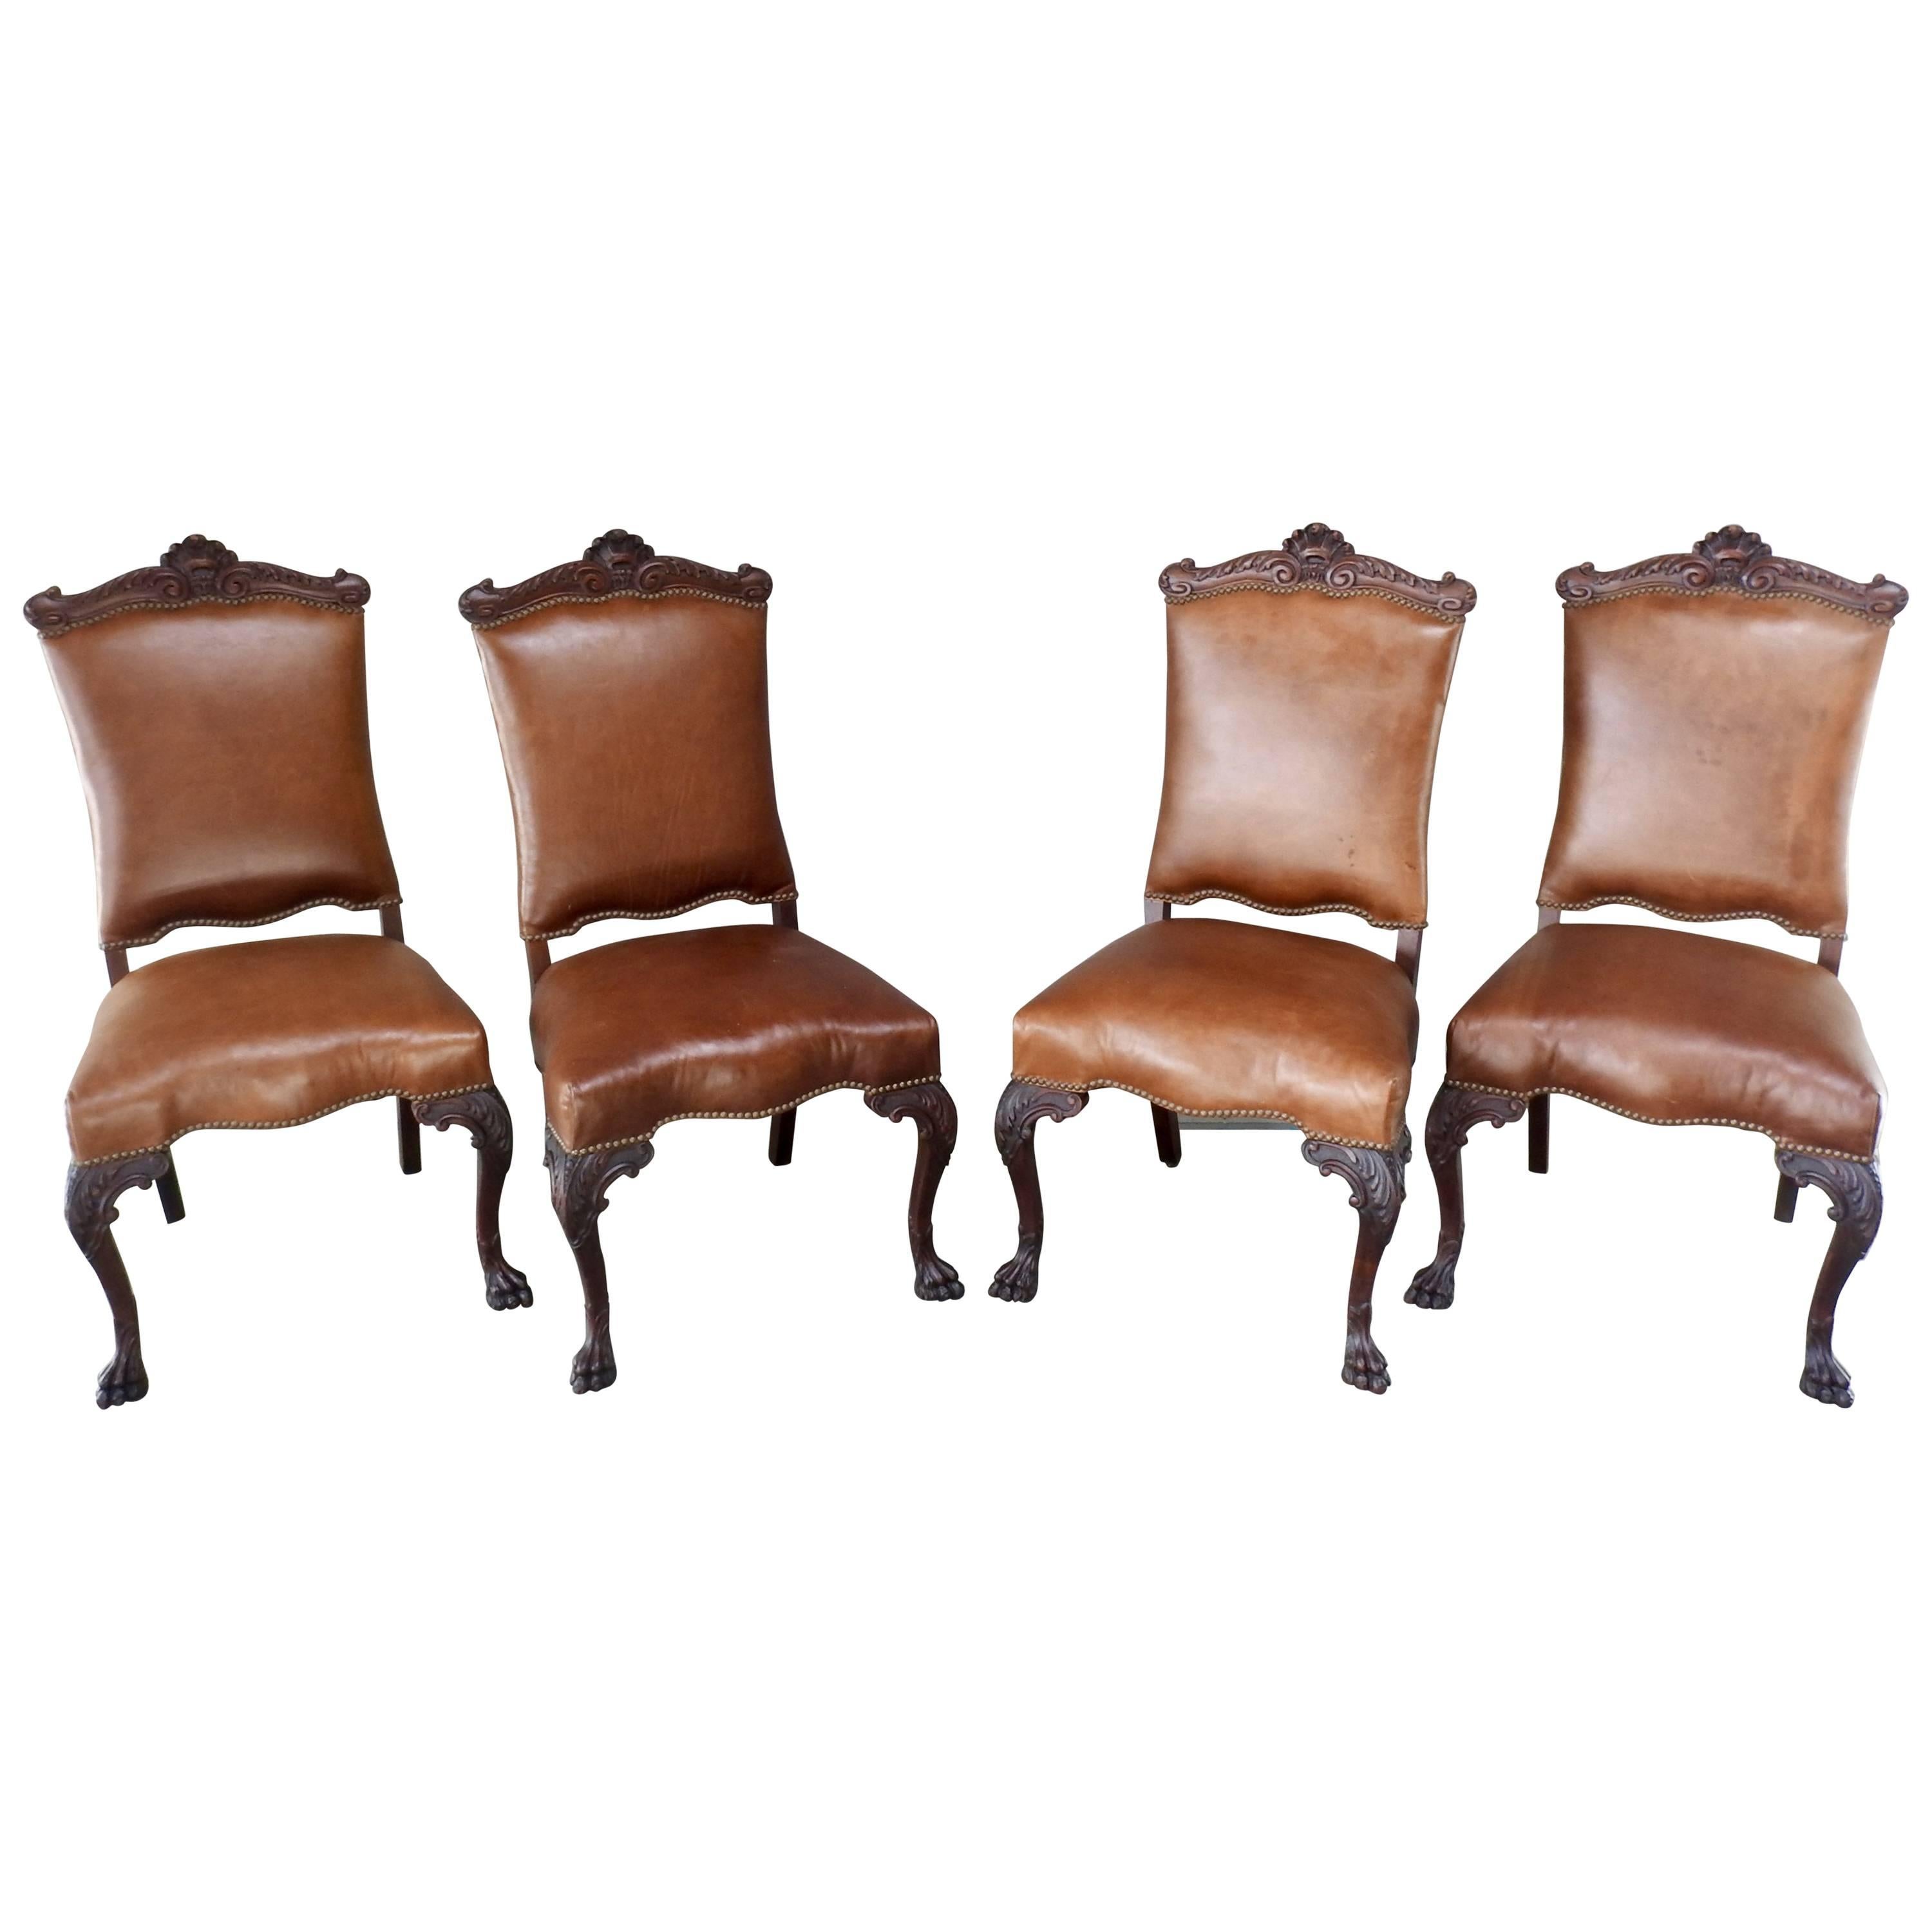 Set of Four American Hairy Paw Chairs with Leather Early 19th Century